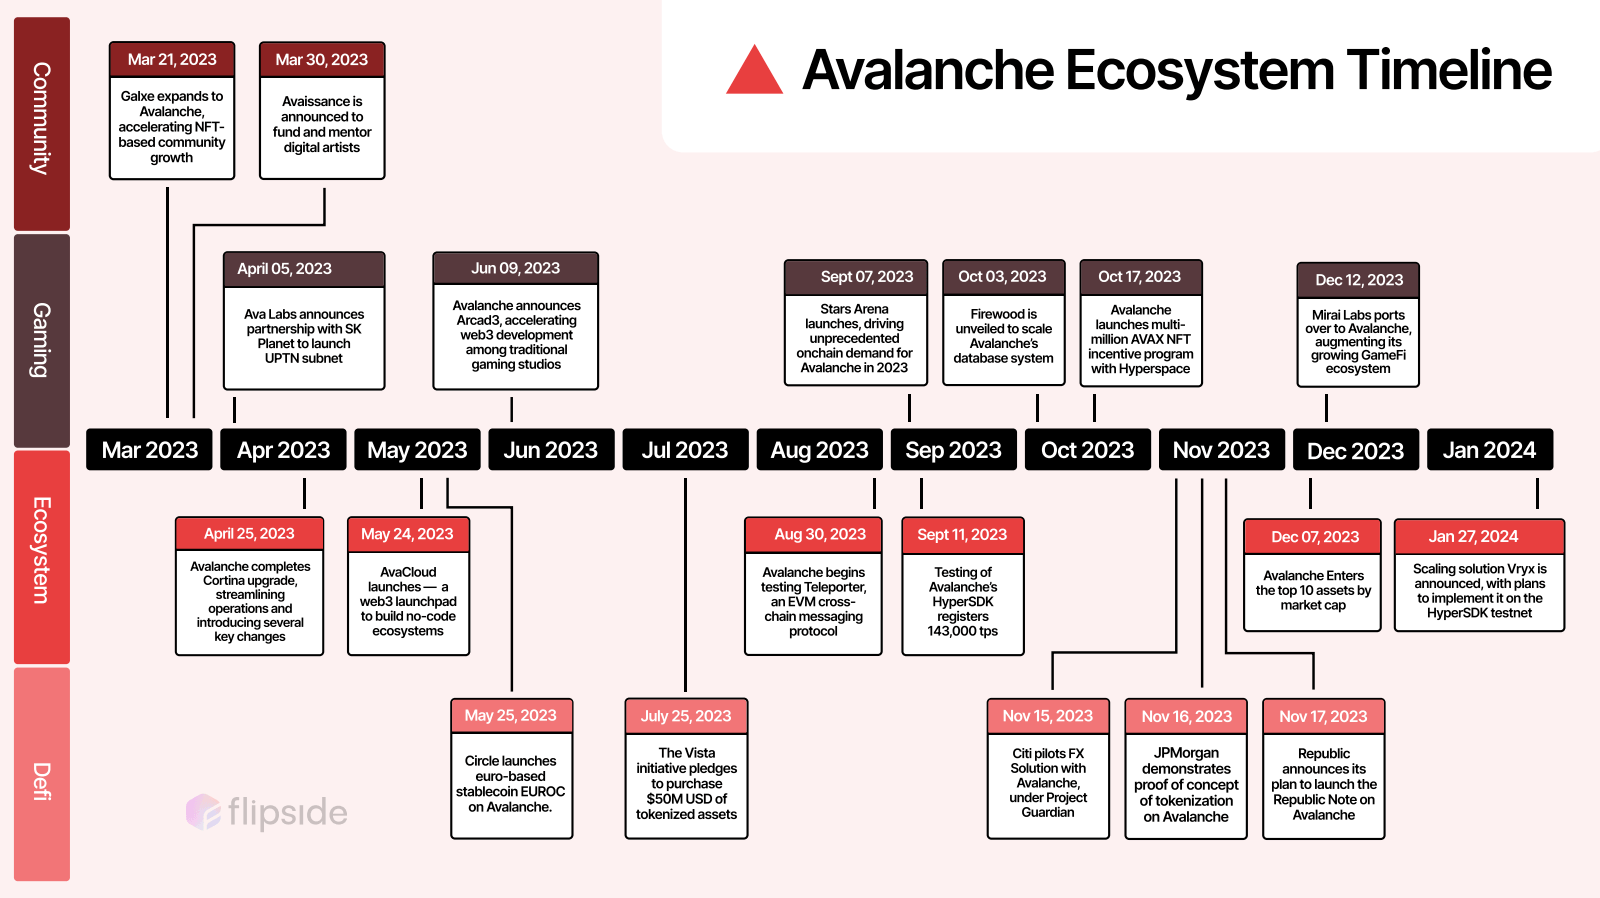 Flipside's State of Avalanche Report